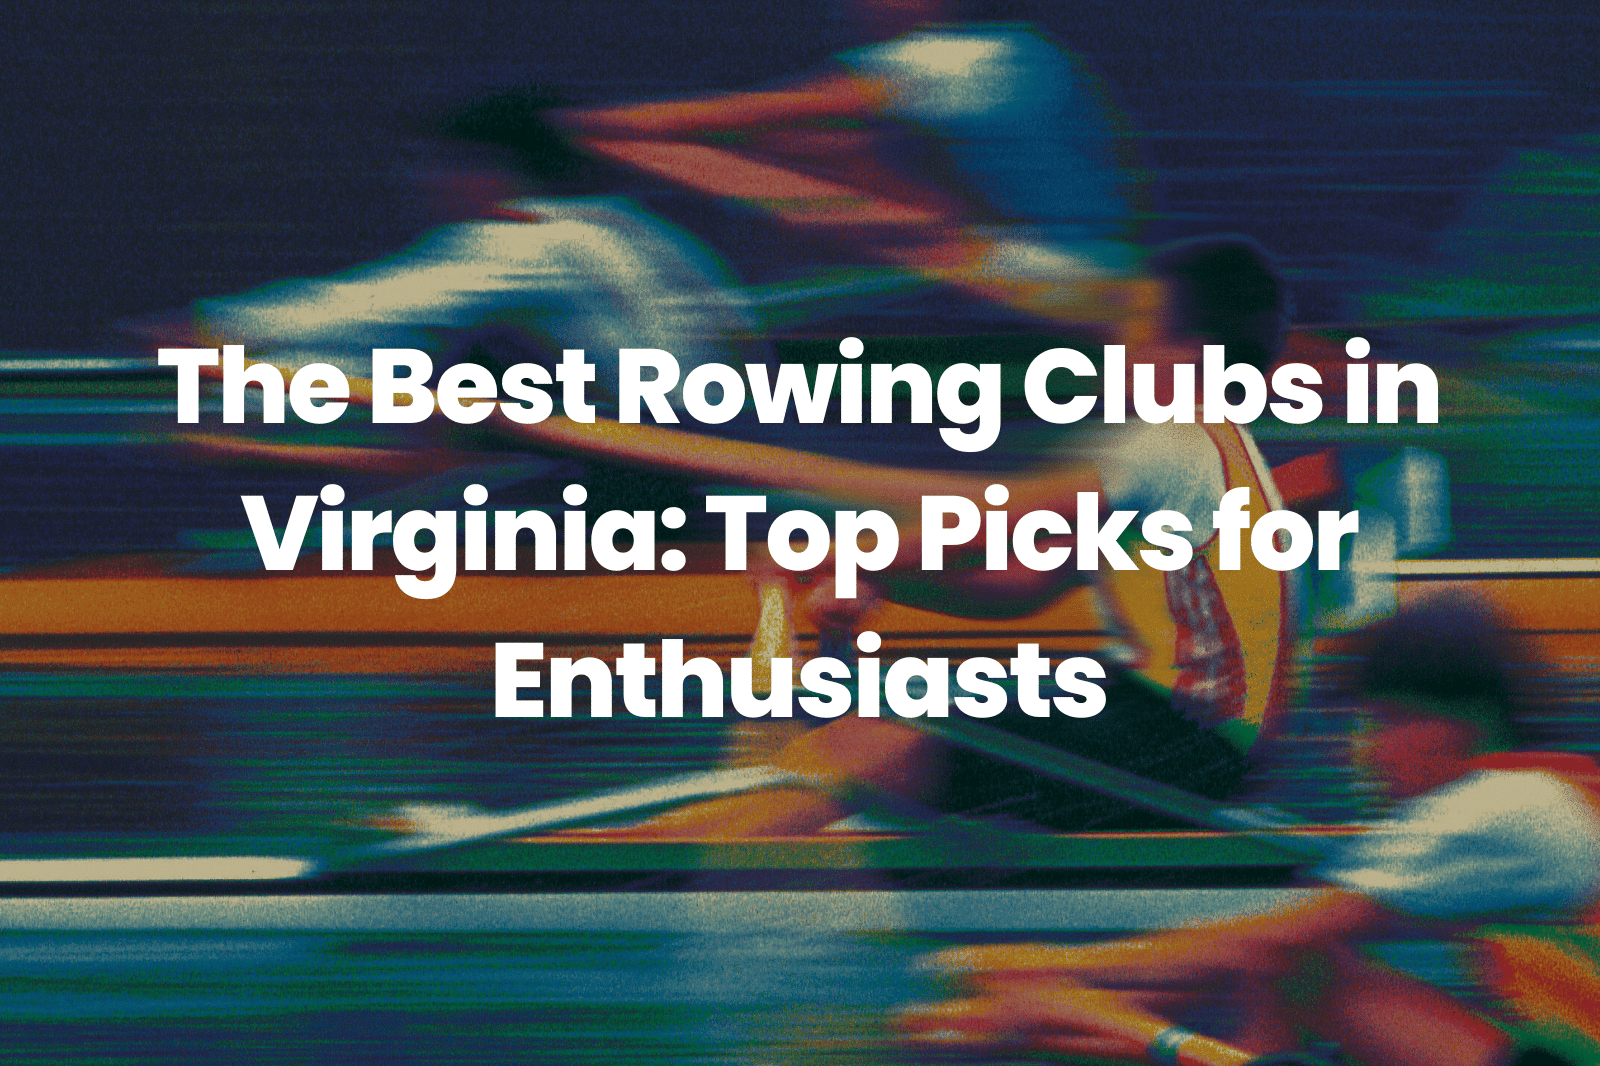 The Best Rowing Clubs in Virginia